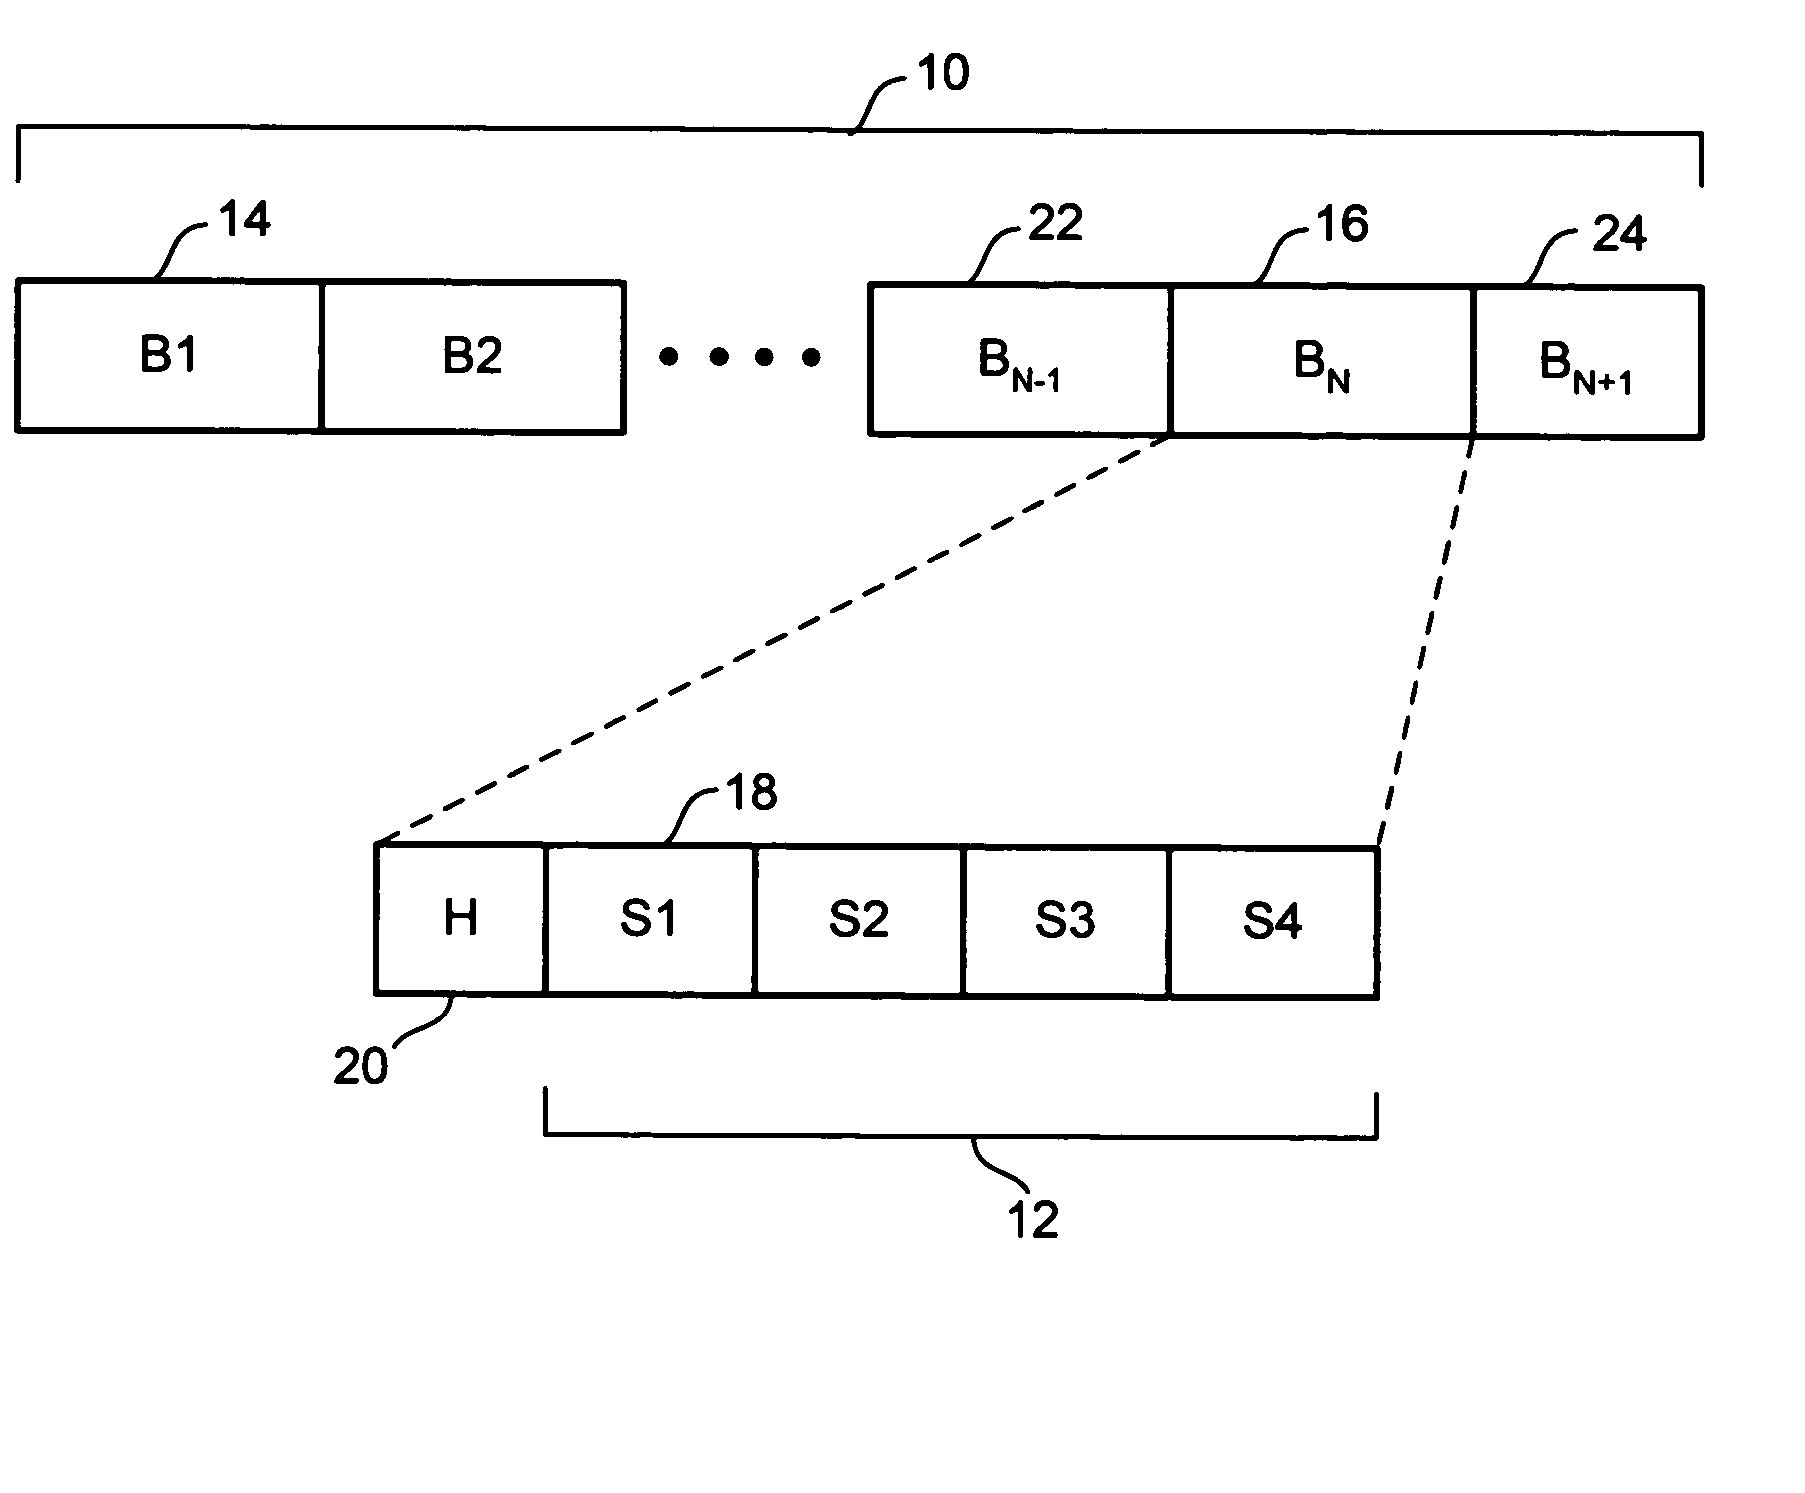 Reducing context memory requirements in a multi-tasking system